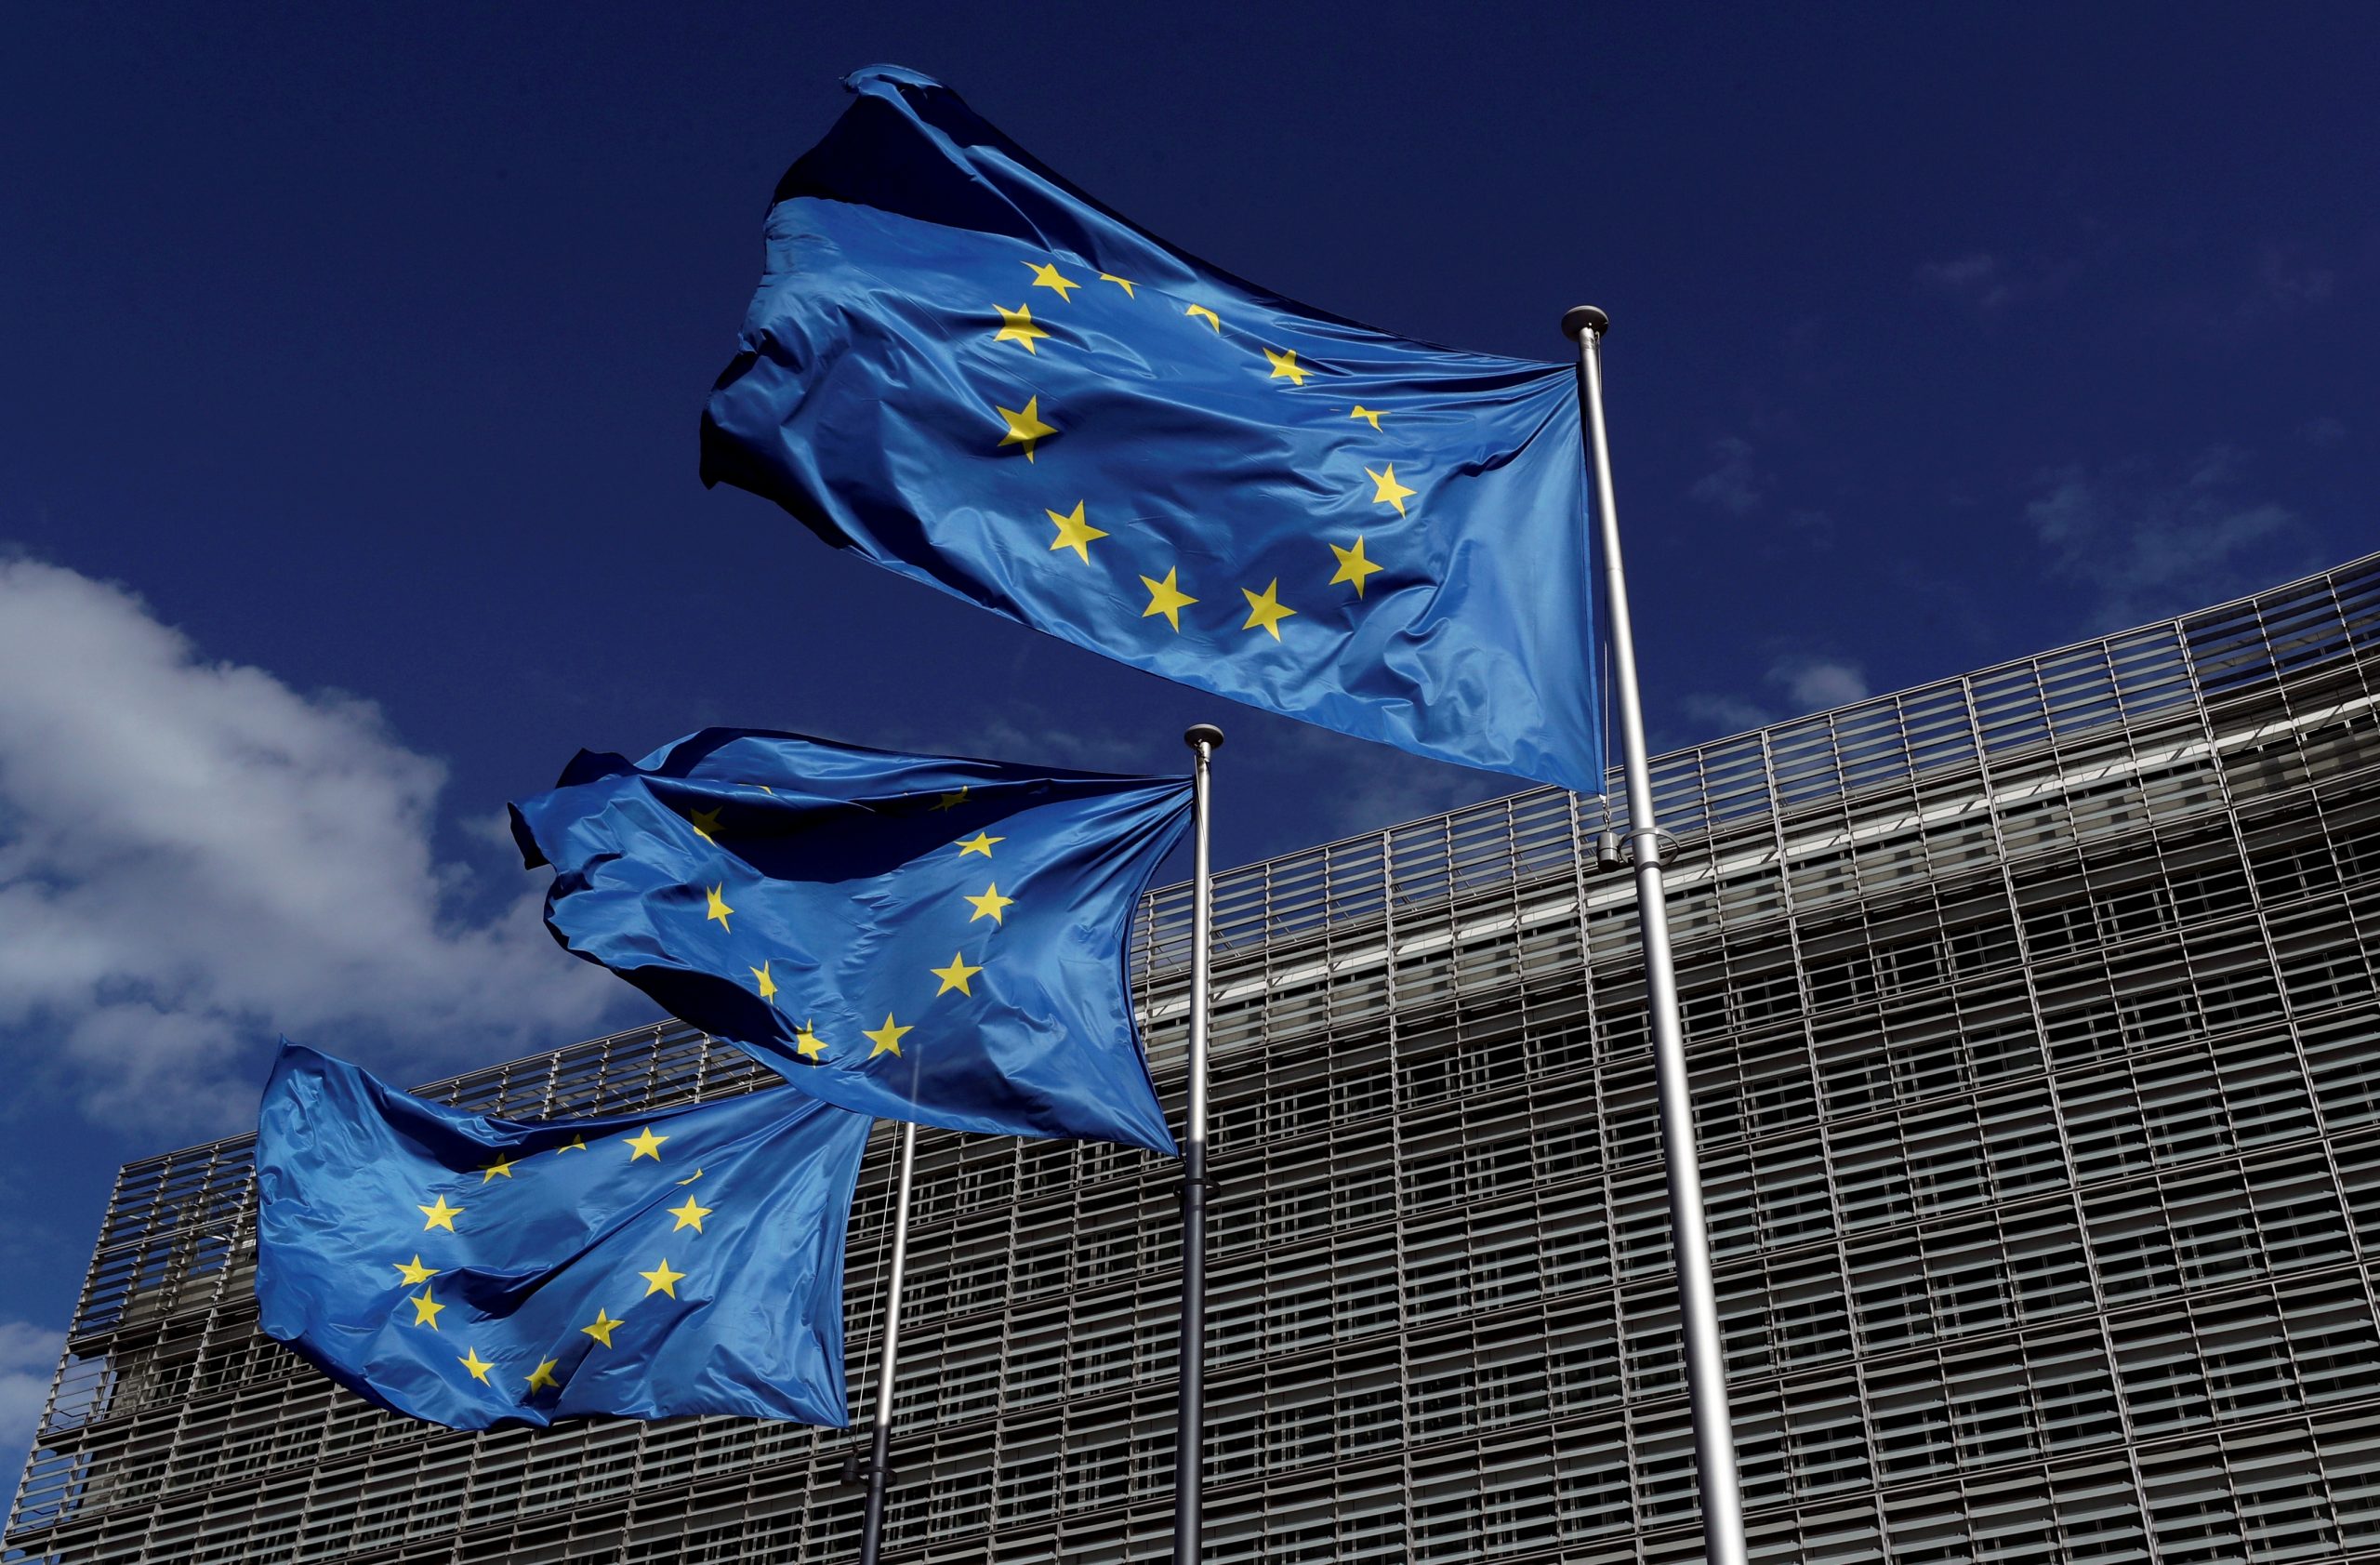 FILE PHOTO: European Union flags flutter outside the European Commission headquarters in Brussels, Belgium FILE PHOTO: European Union flags flutter outside the European Commission headquarters in Brussels, Belgium August 21, 2020. REUTERS/Yves Herman/File Photo YVES HERMAN